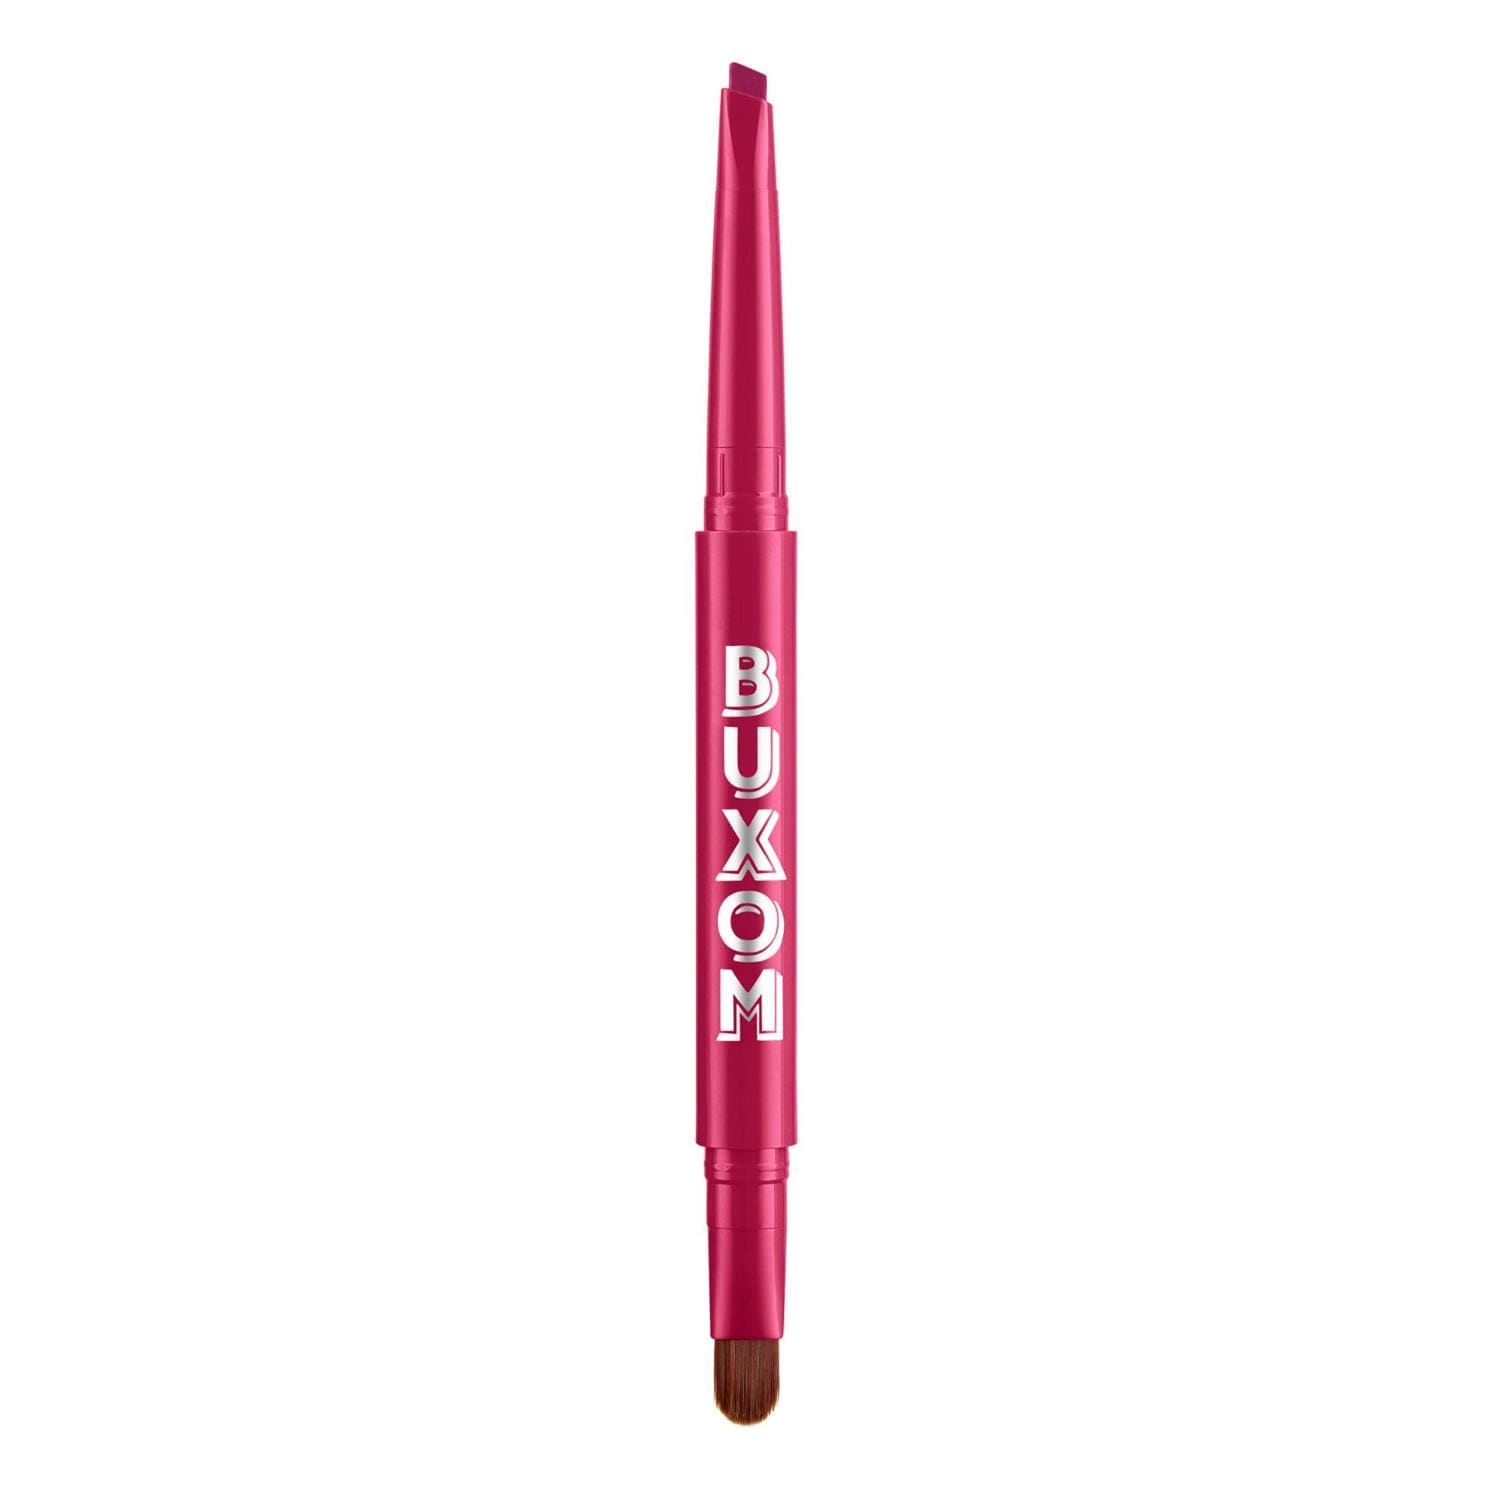 BUXOM Power Line Plumping Lip Liner, BARARGED RUBY, Recharged Ruby